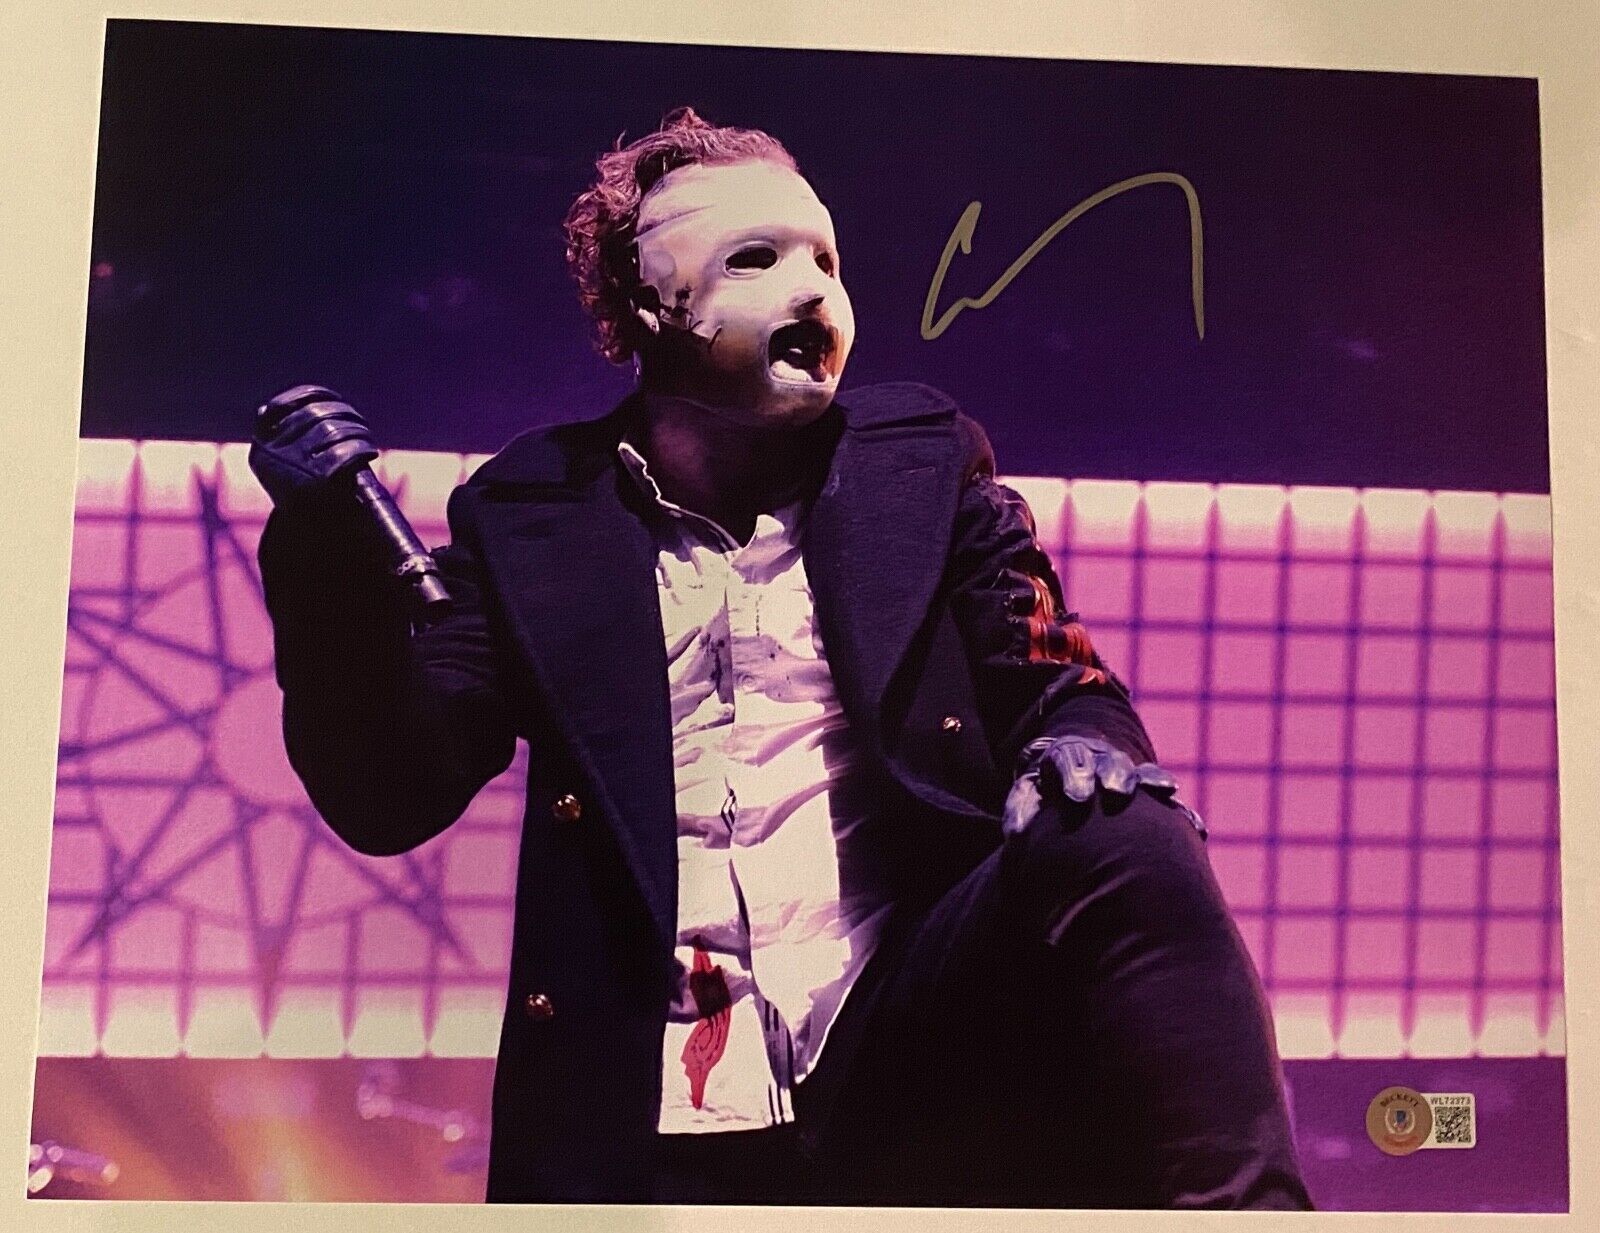 Corey Taylor Signed Autograph 11x14 Photo Poster painting Slipknot Stone Sour Proof Beckett COA